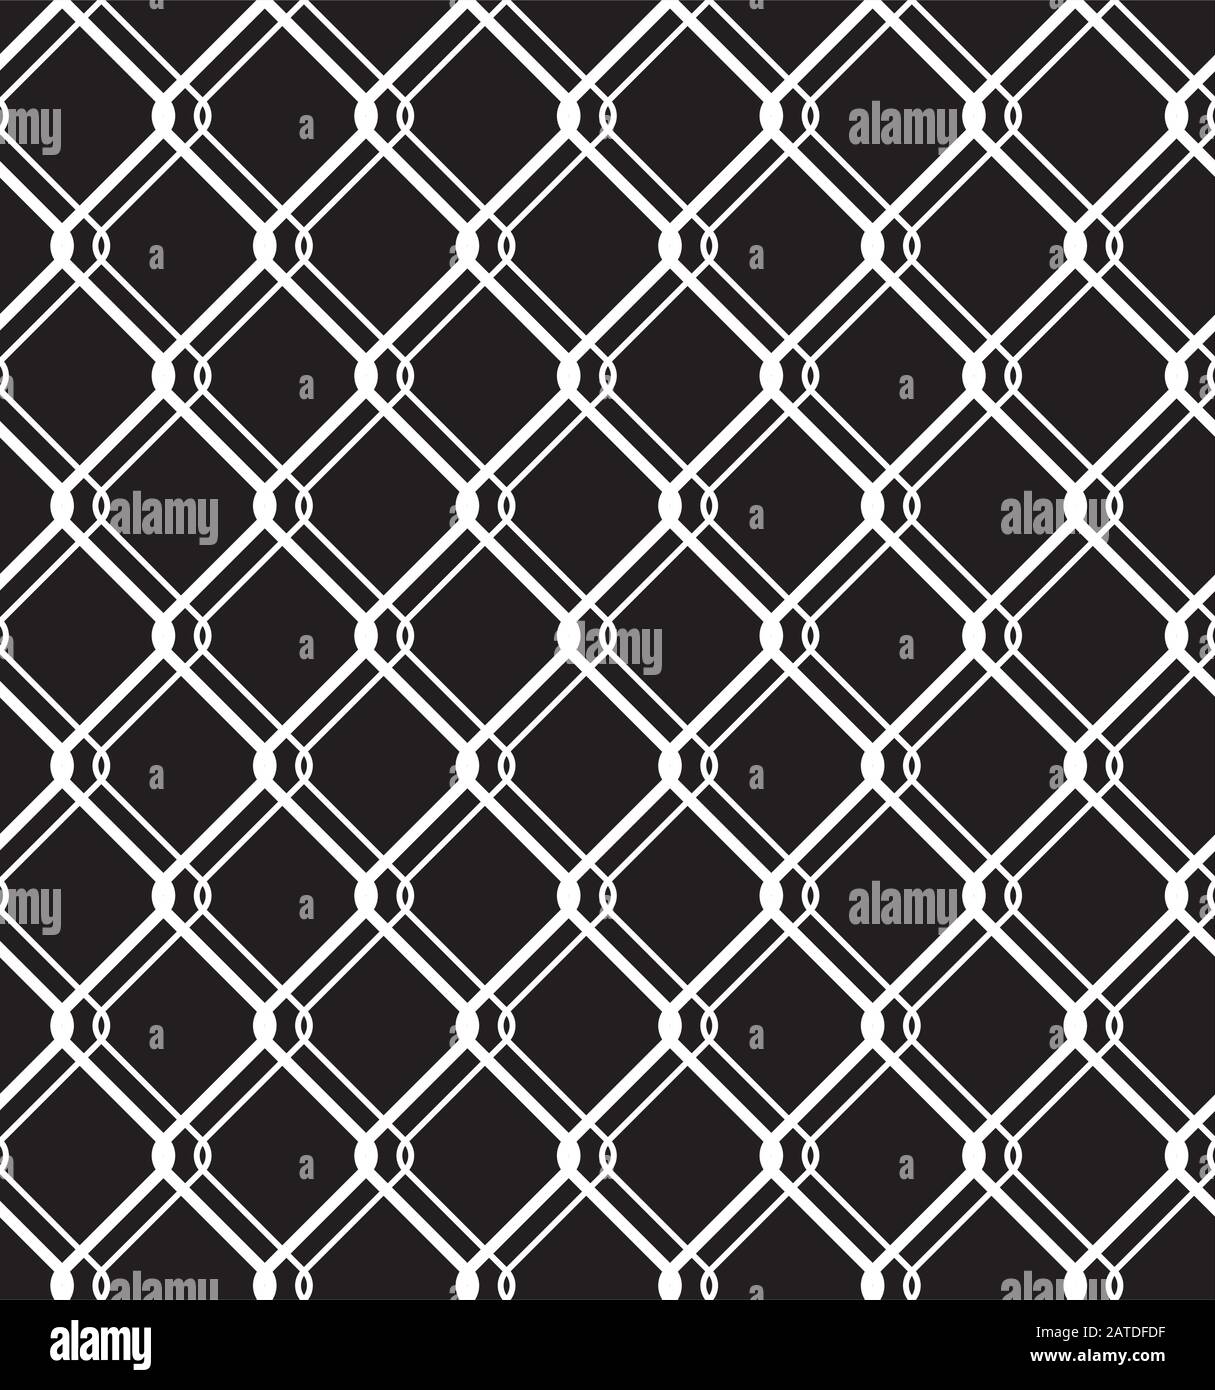 Steel wired fence seamless texture overlay. Metallic wire mesh